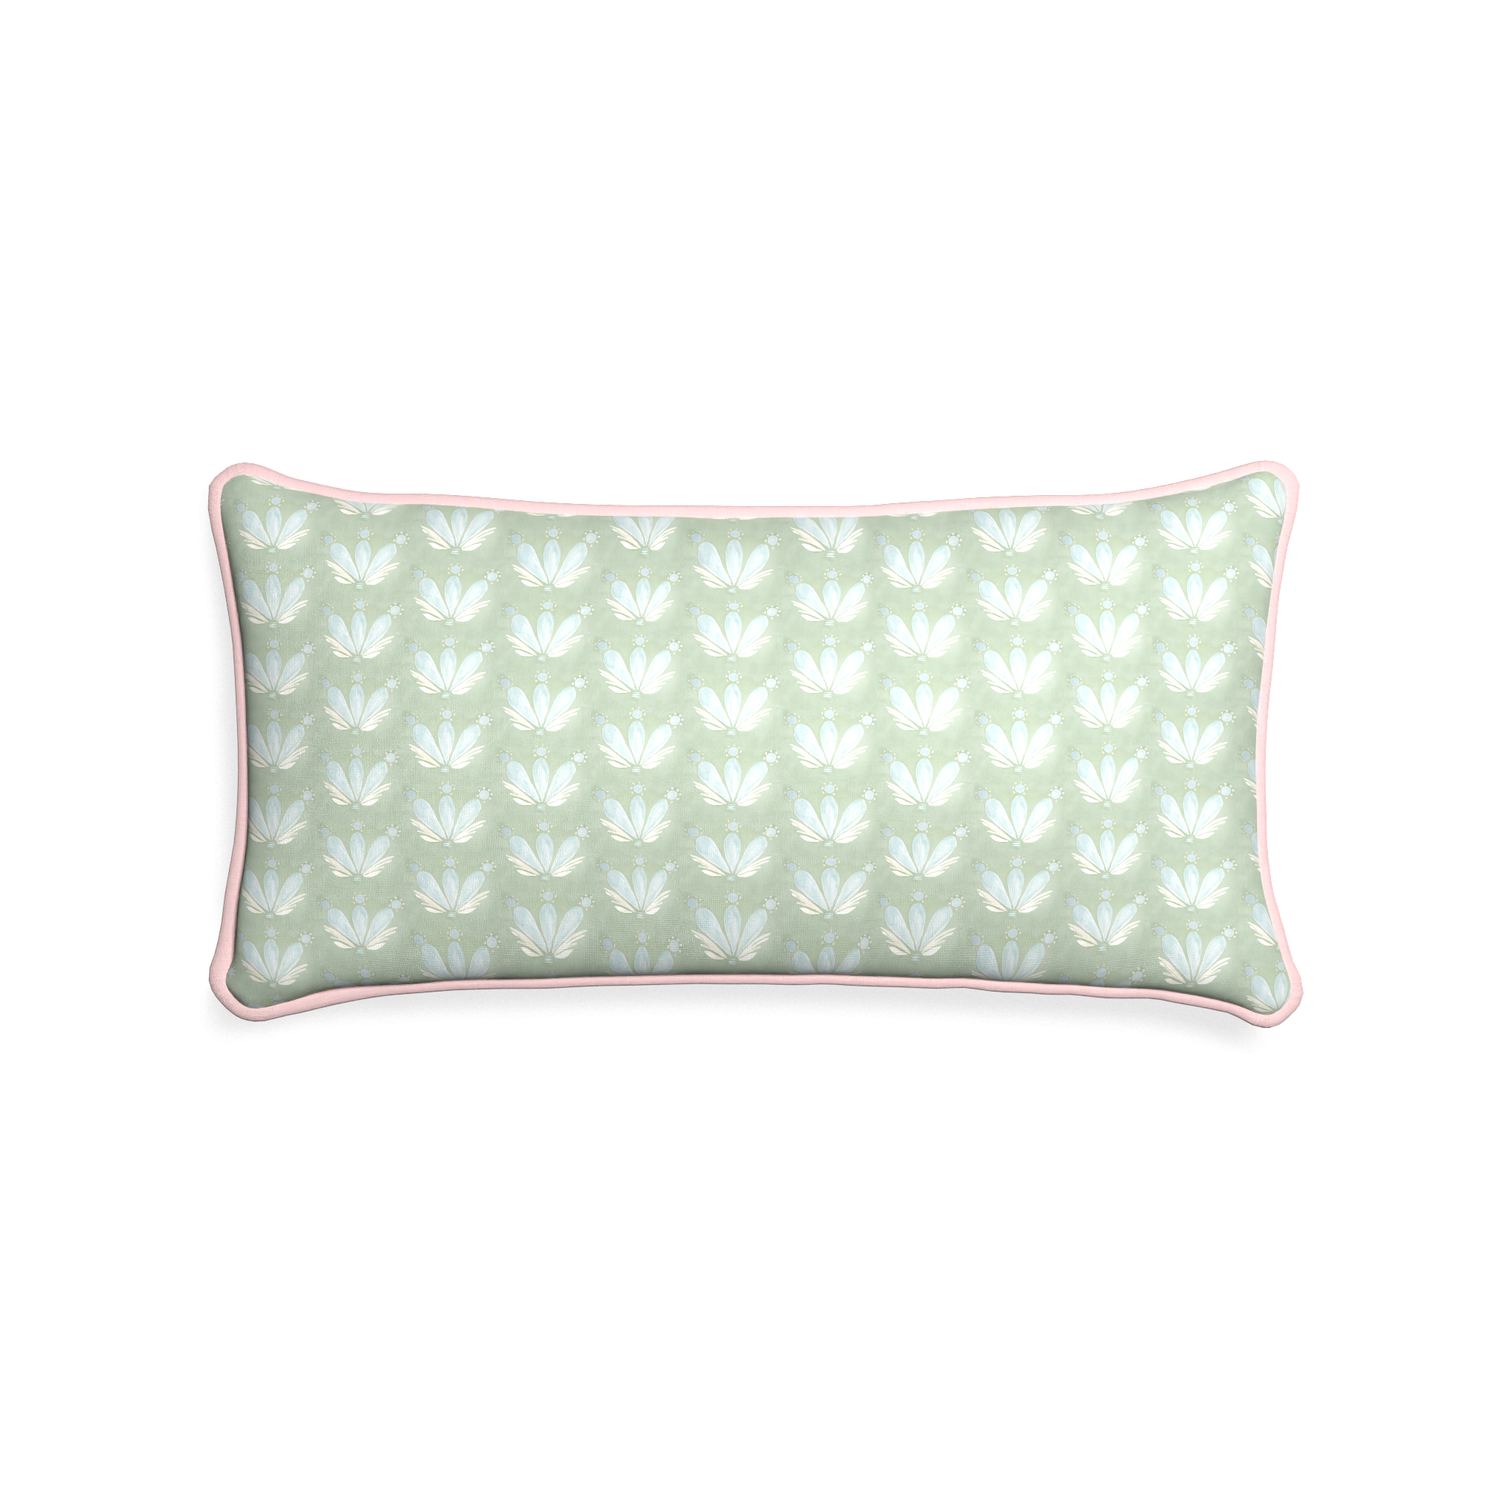 Midi-lumbar serena sea salt custom blue & green floral drop repeatpillow with petal piping on white background